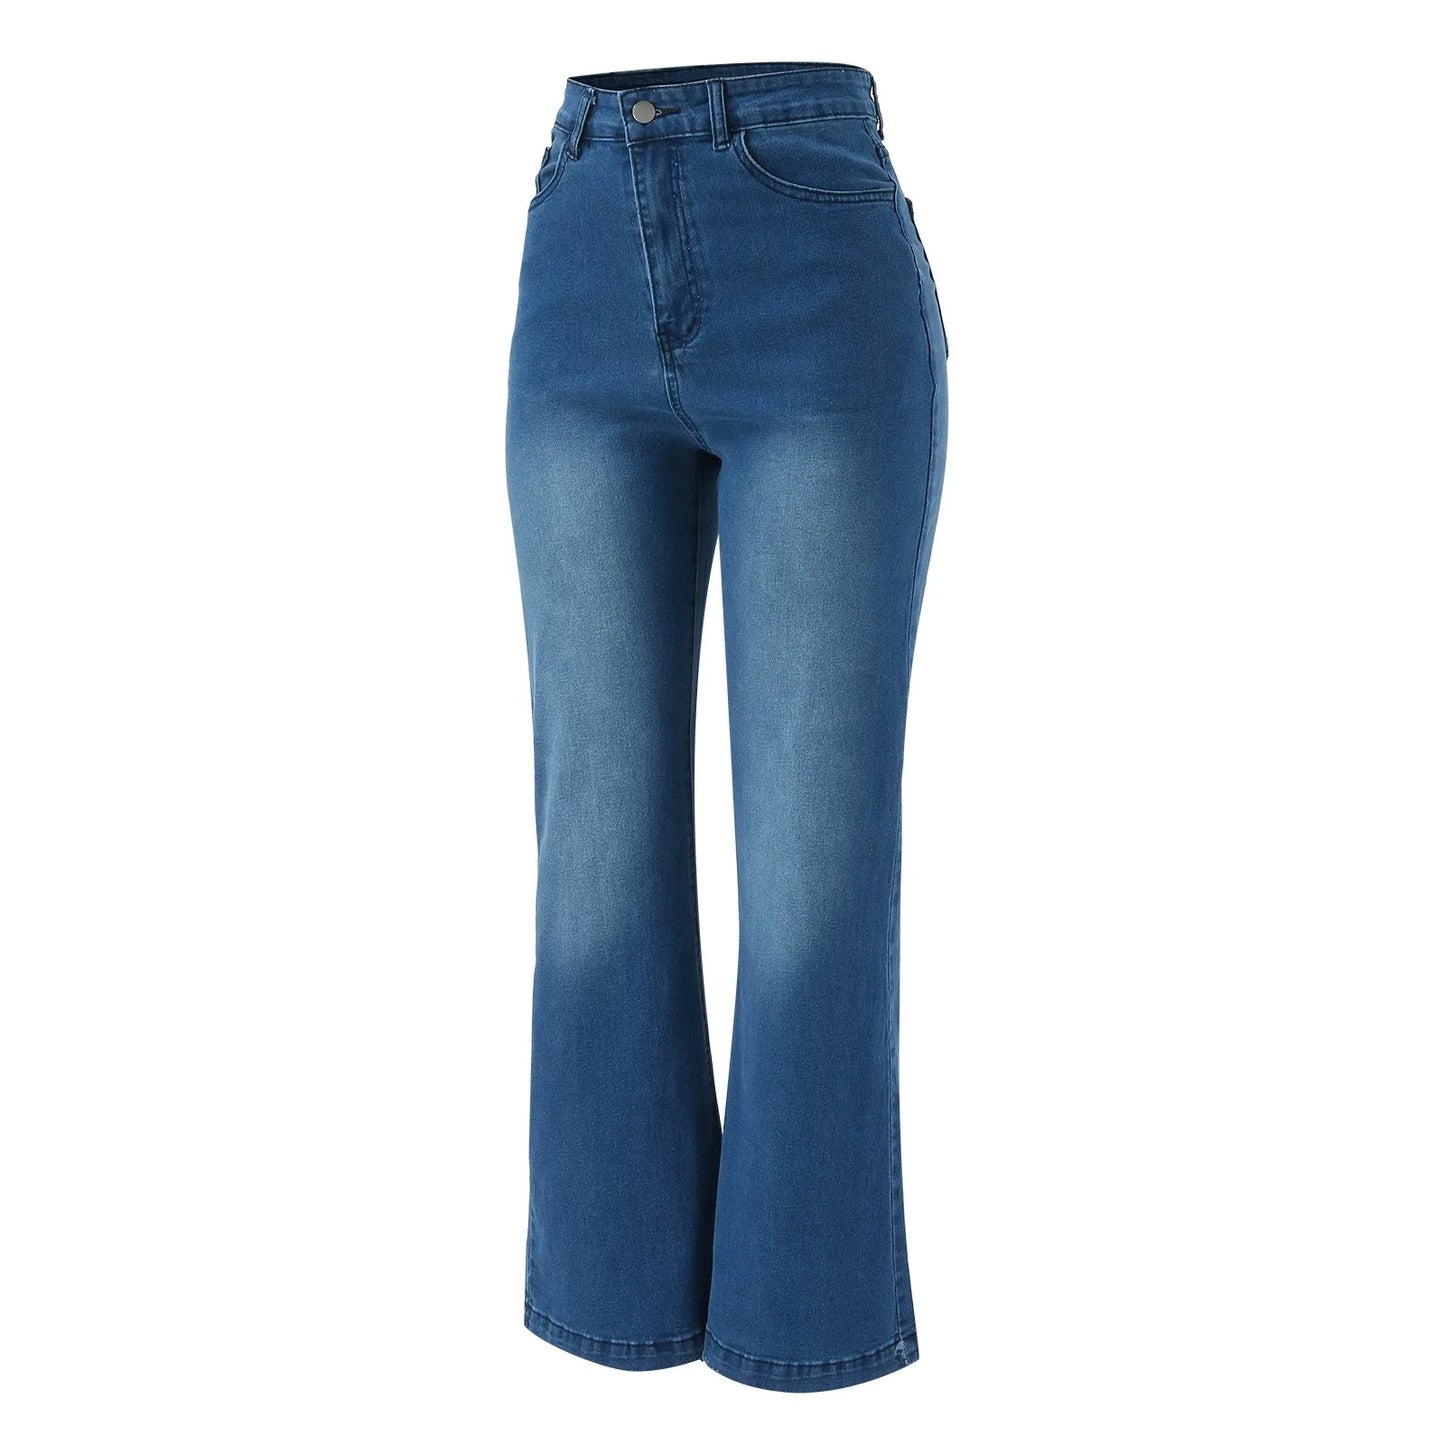 Bell Bottom Jeans High Waisted Flare